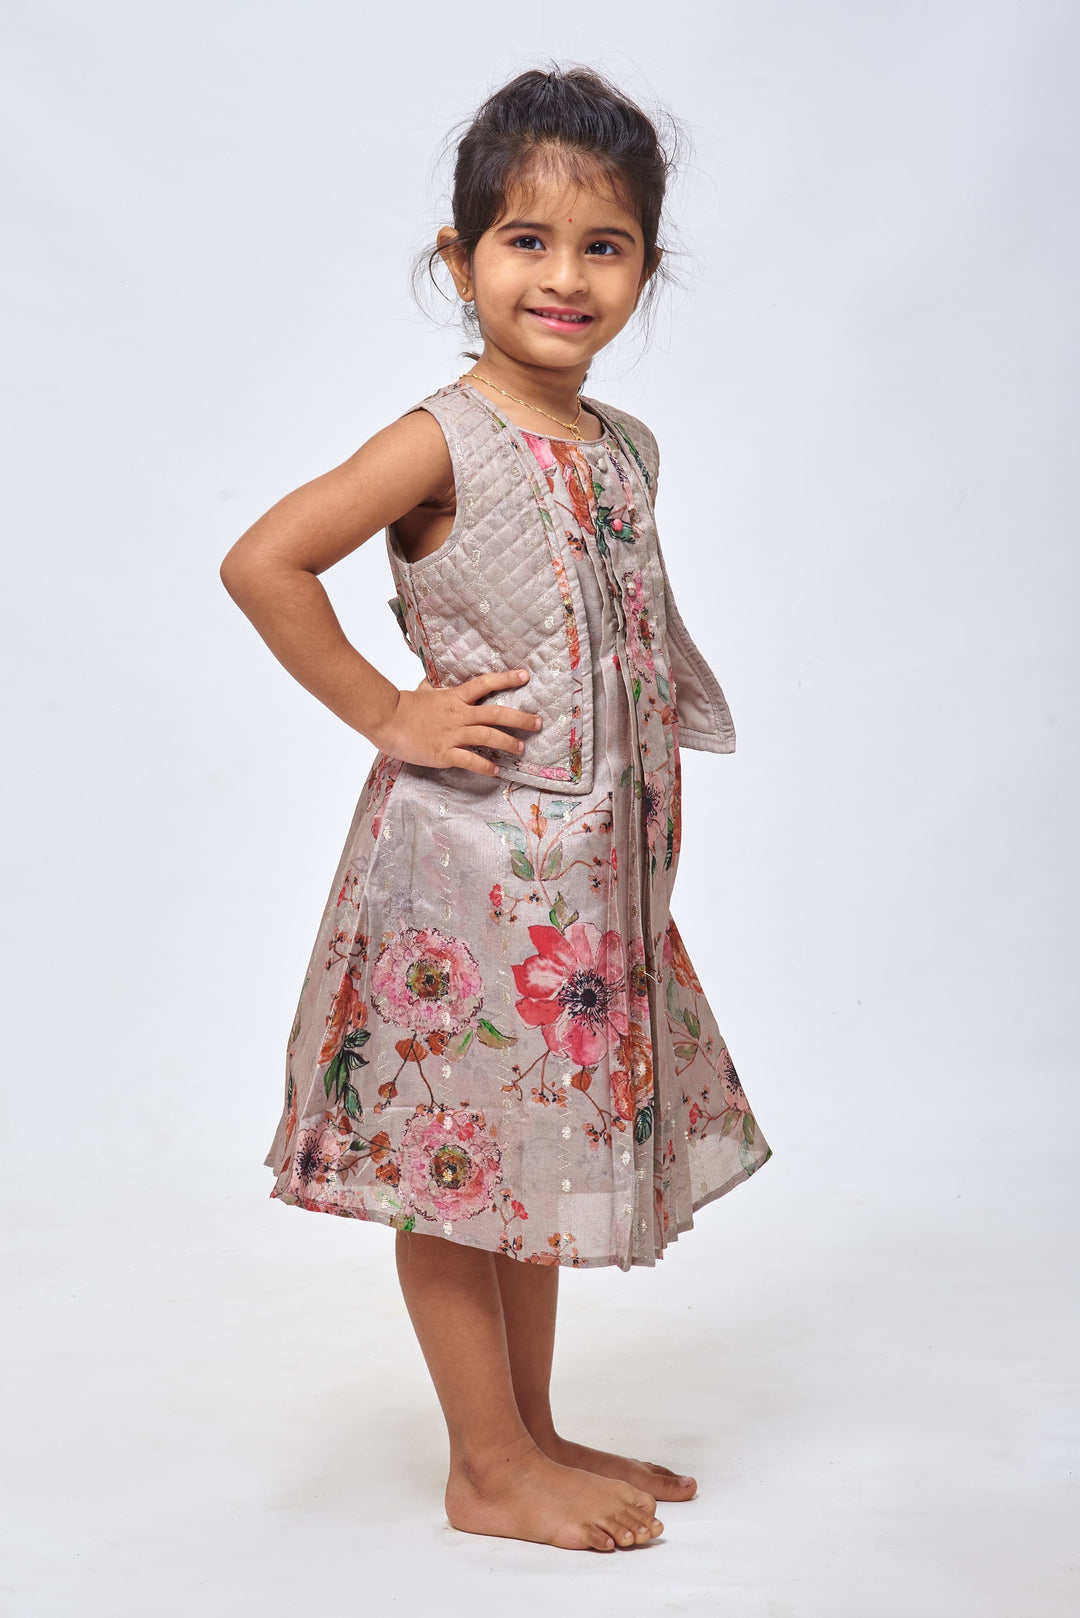 The Nesavu Girls Cotton Frock Elegant Grey: Zari Embroidered Grey Cotton Frock with Attached Overcoat for Girls Nesavu Baby Girl Designer Dress Collection | Casual Cotton Frocks | The Nesavu